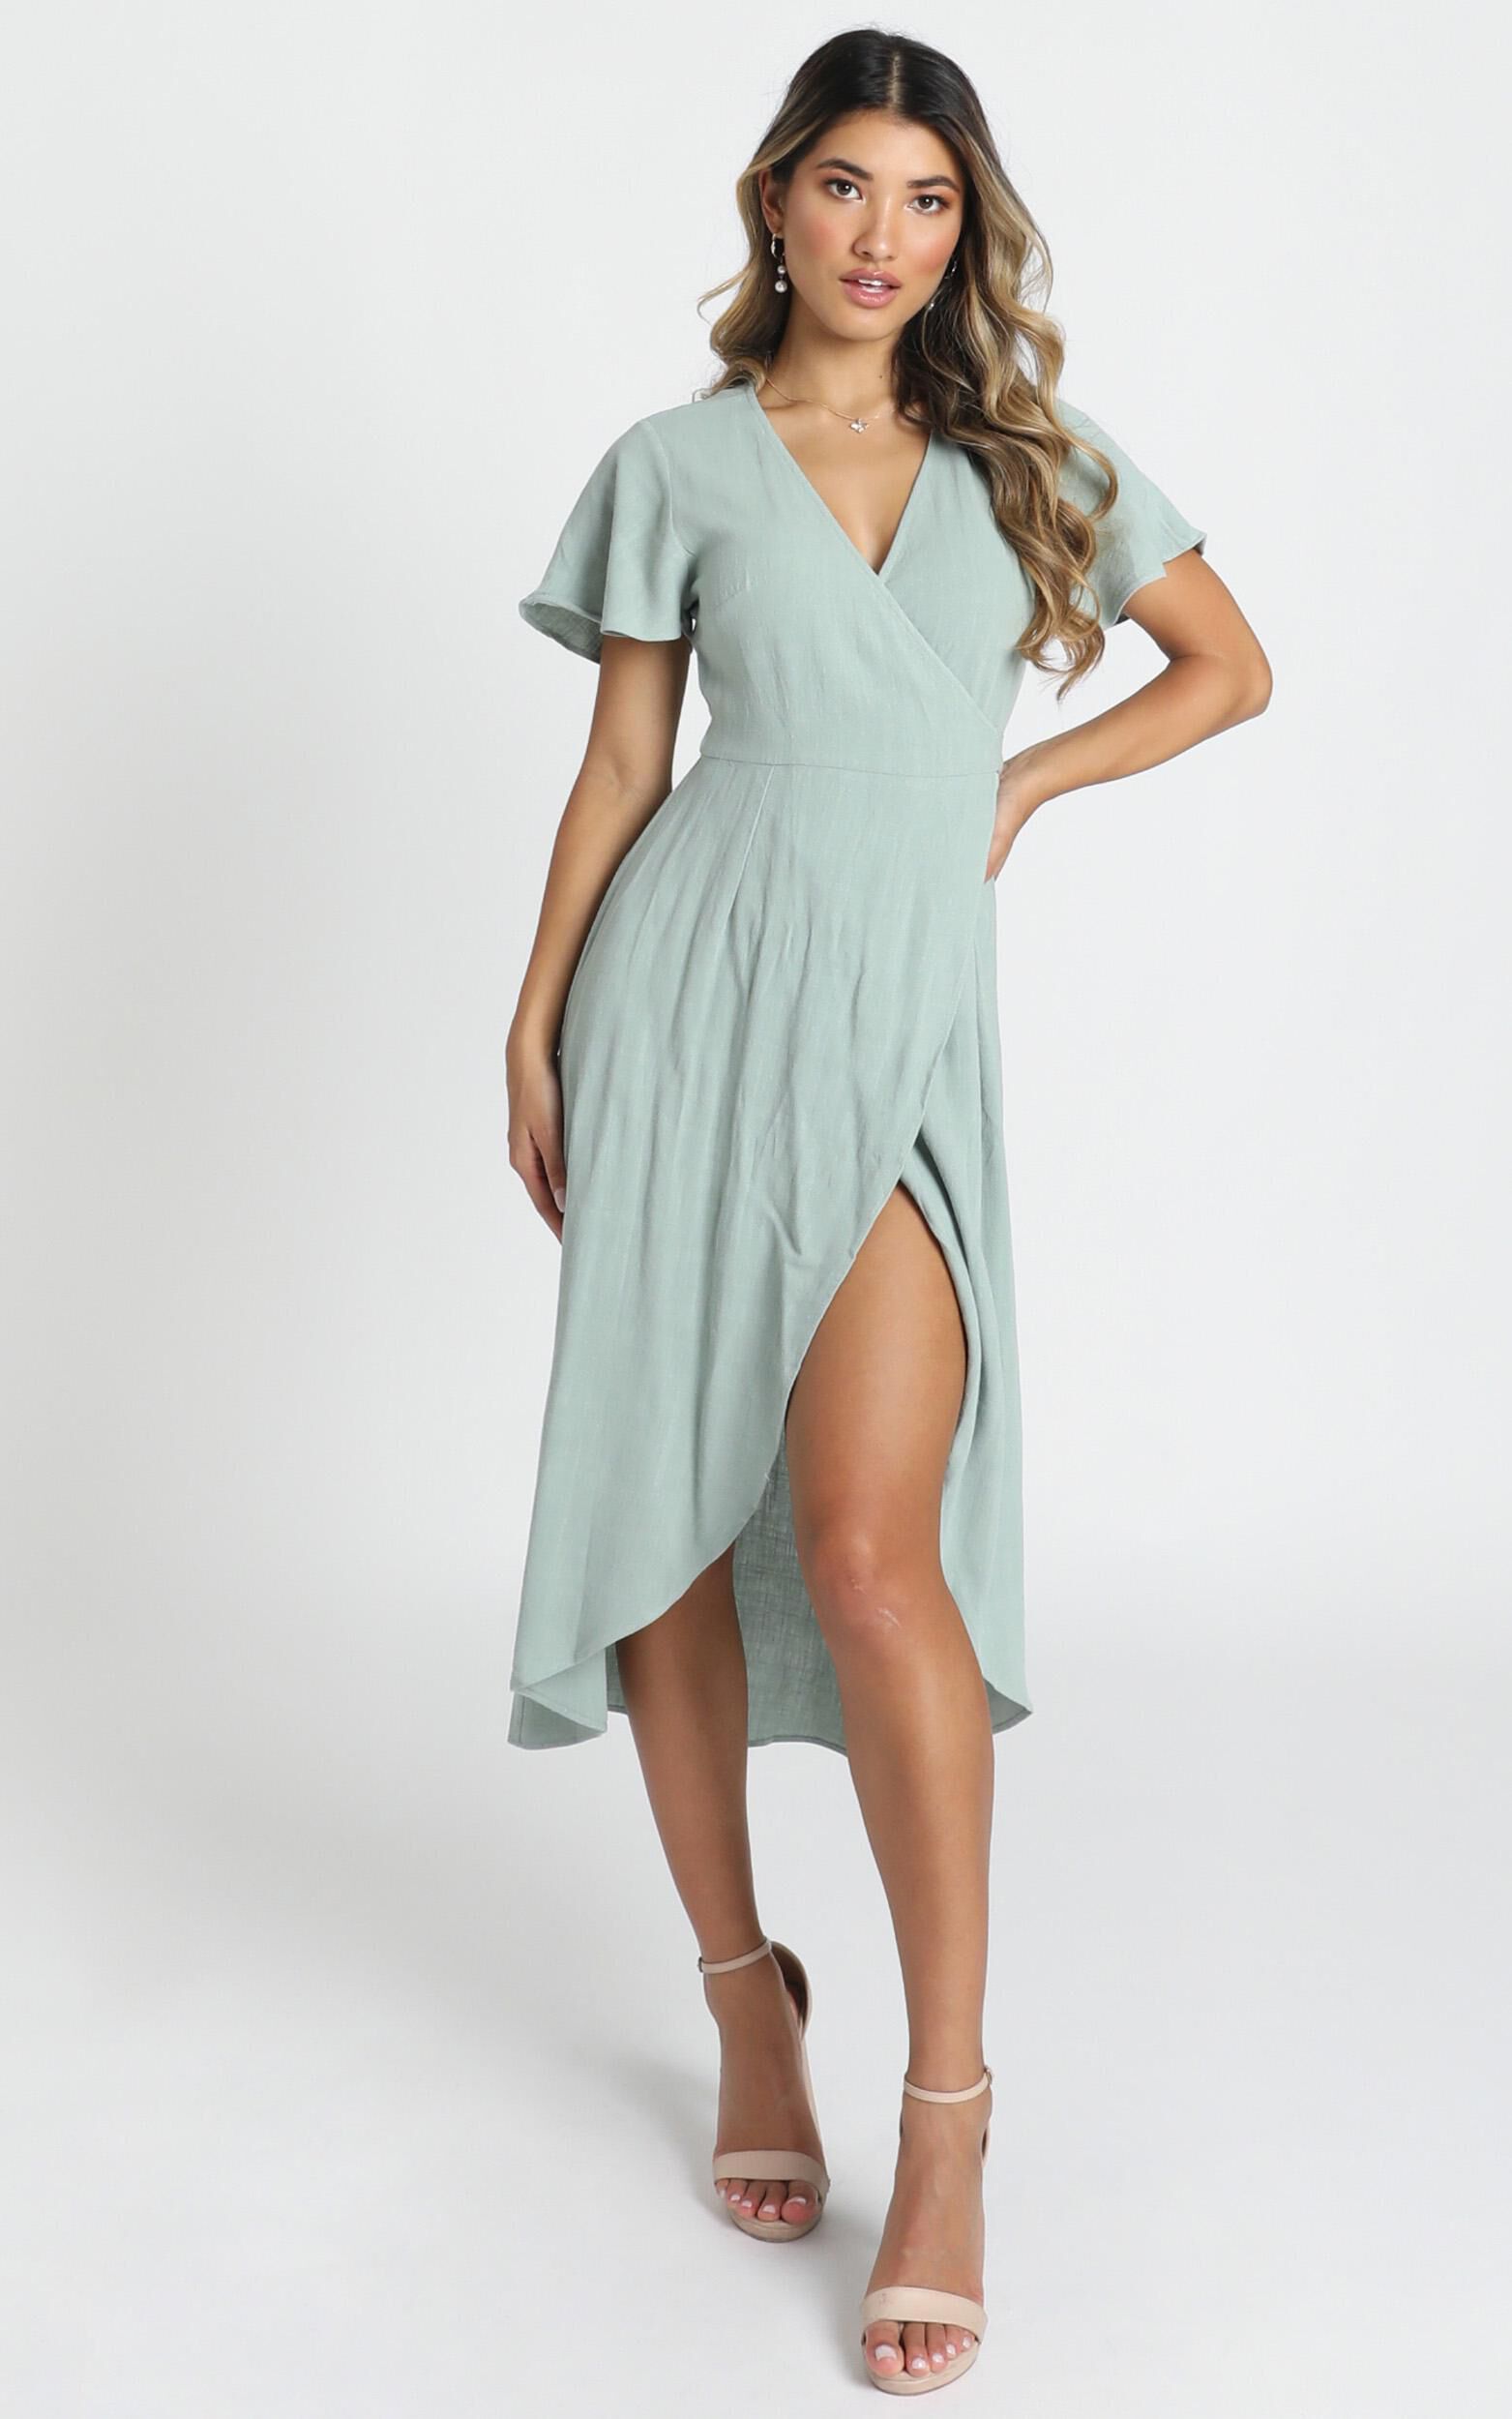 casual high low dress